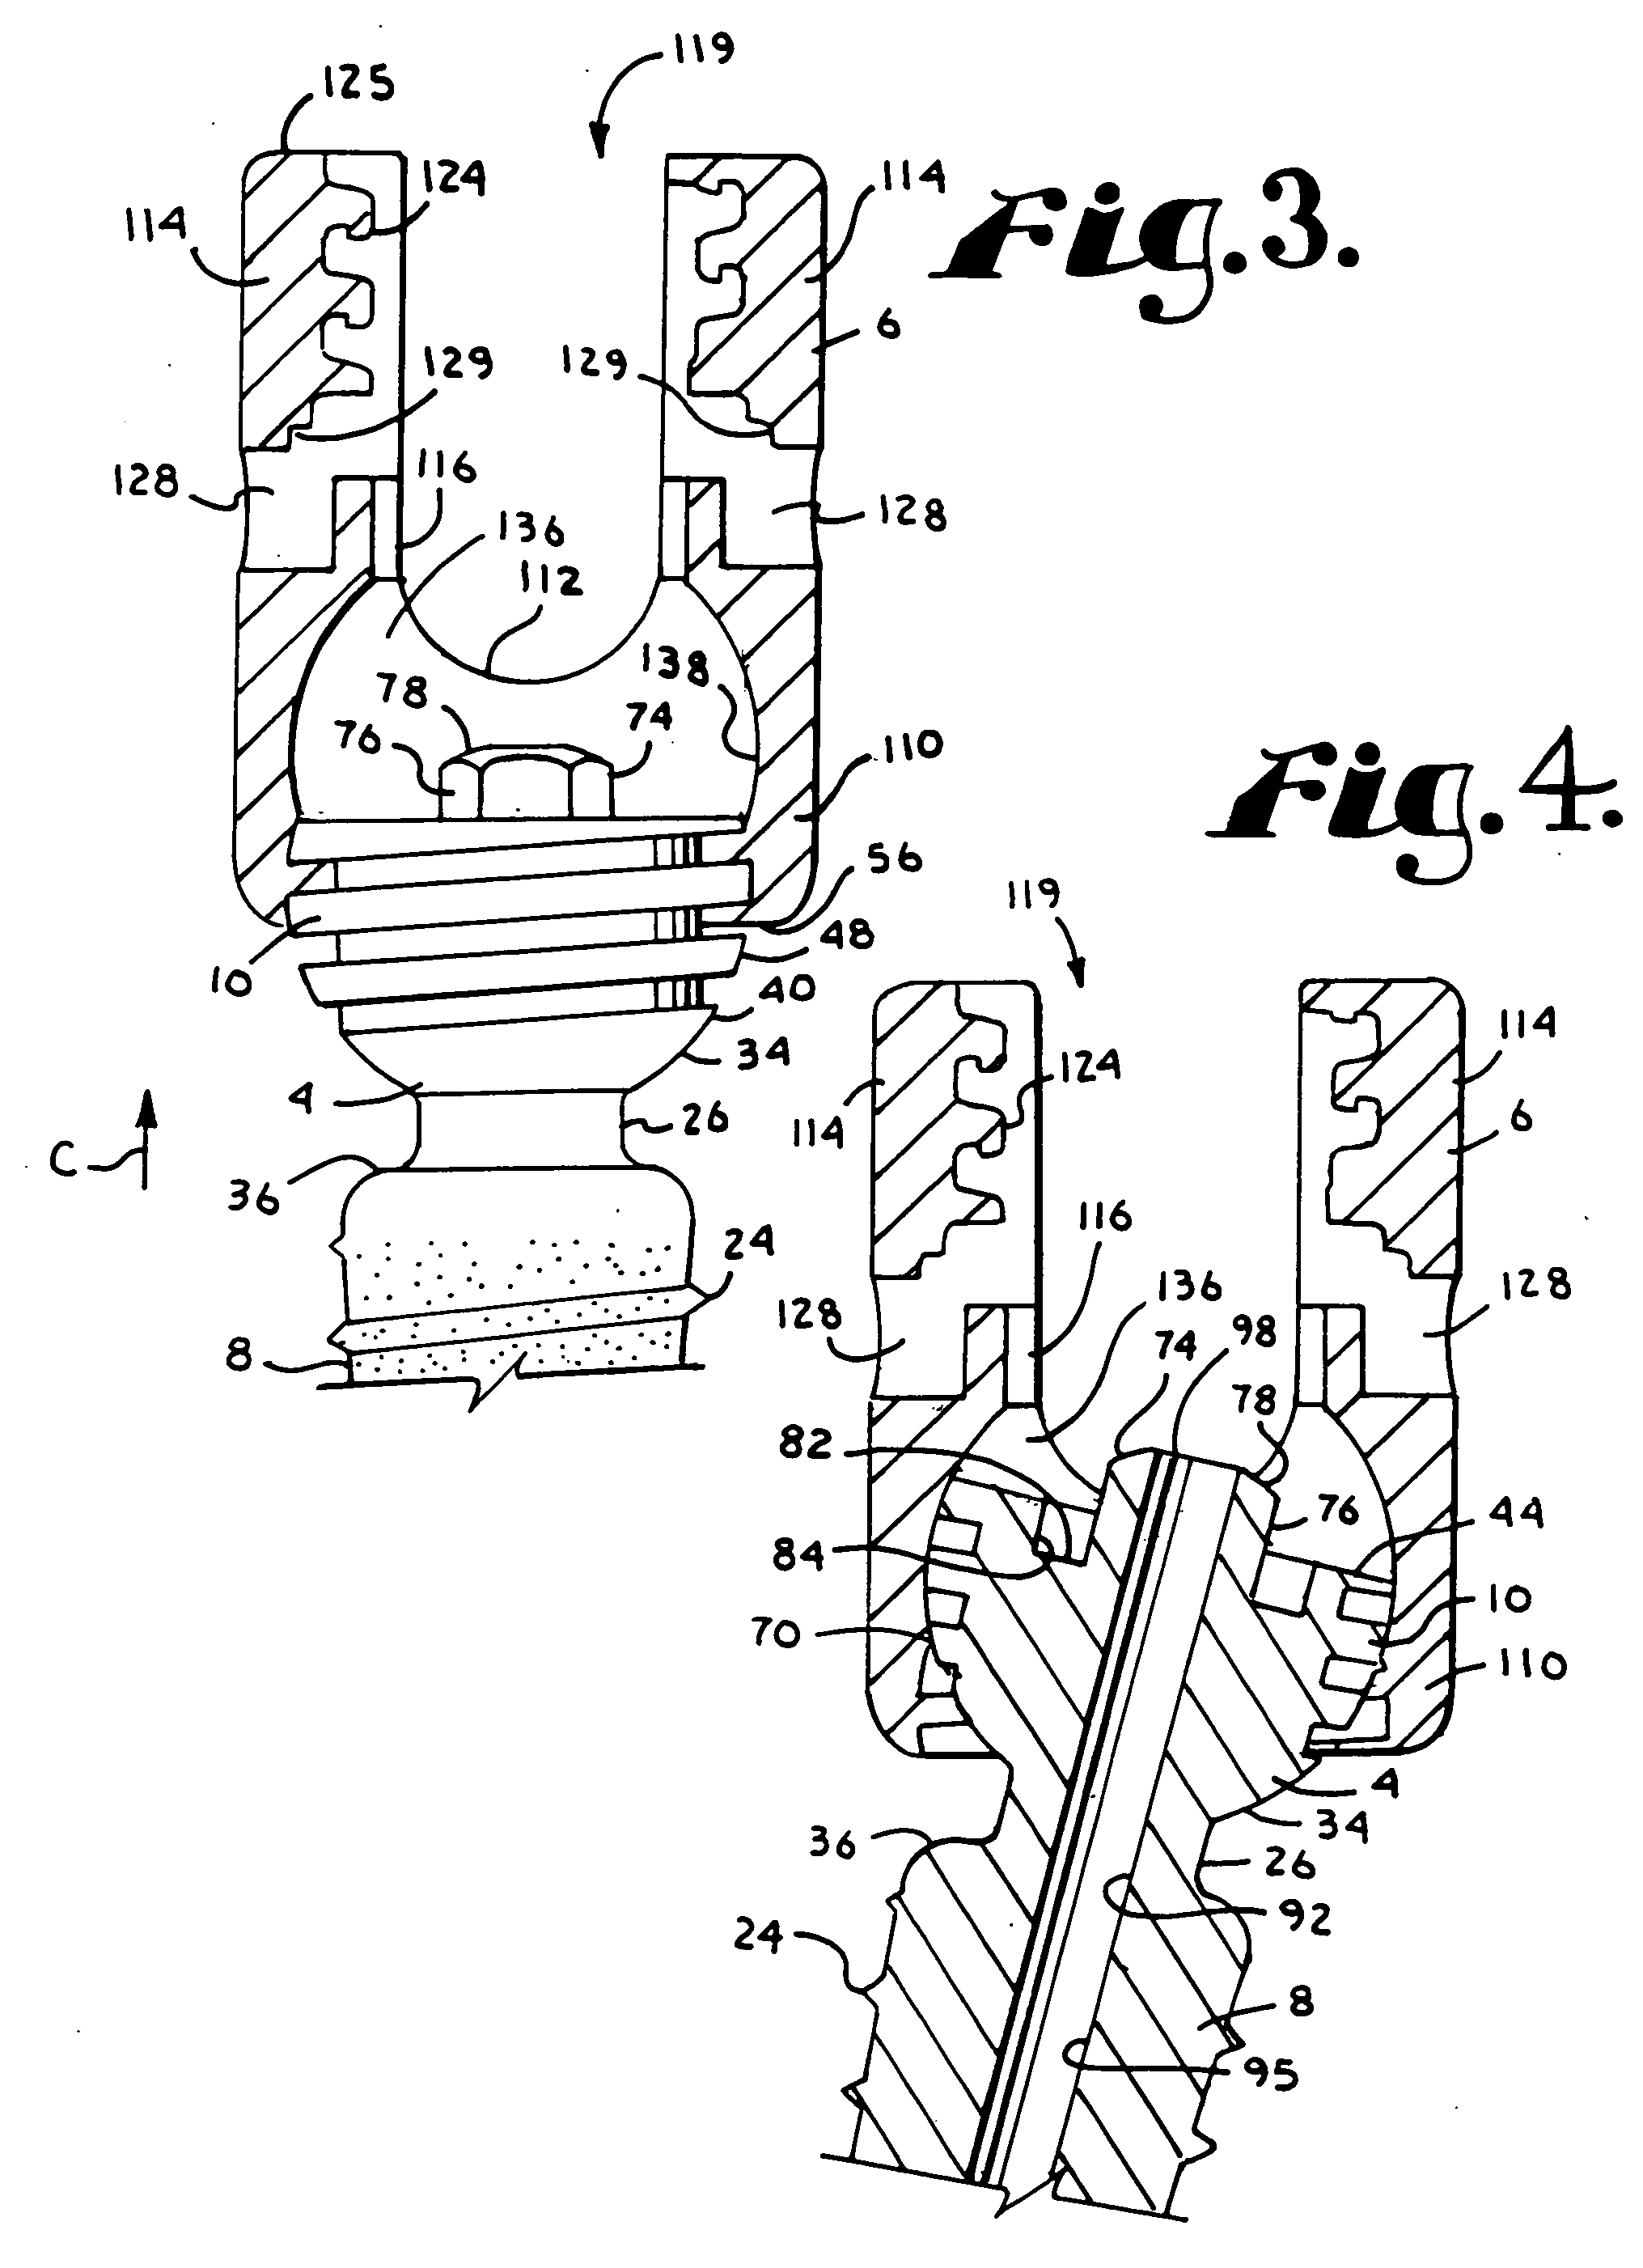 Dynamic stabilization medical implant assemblies and methods